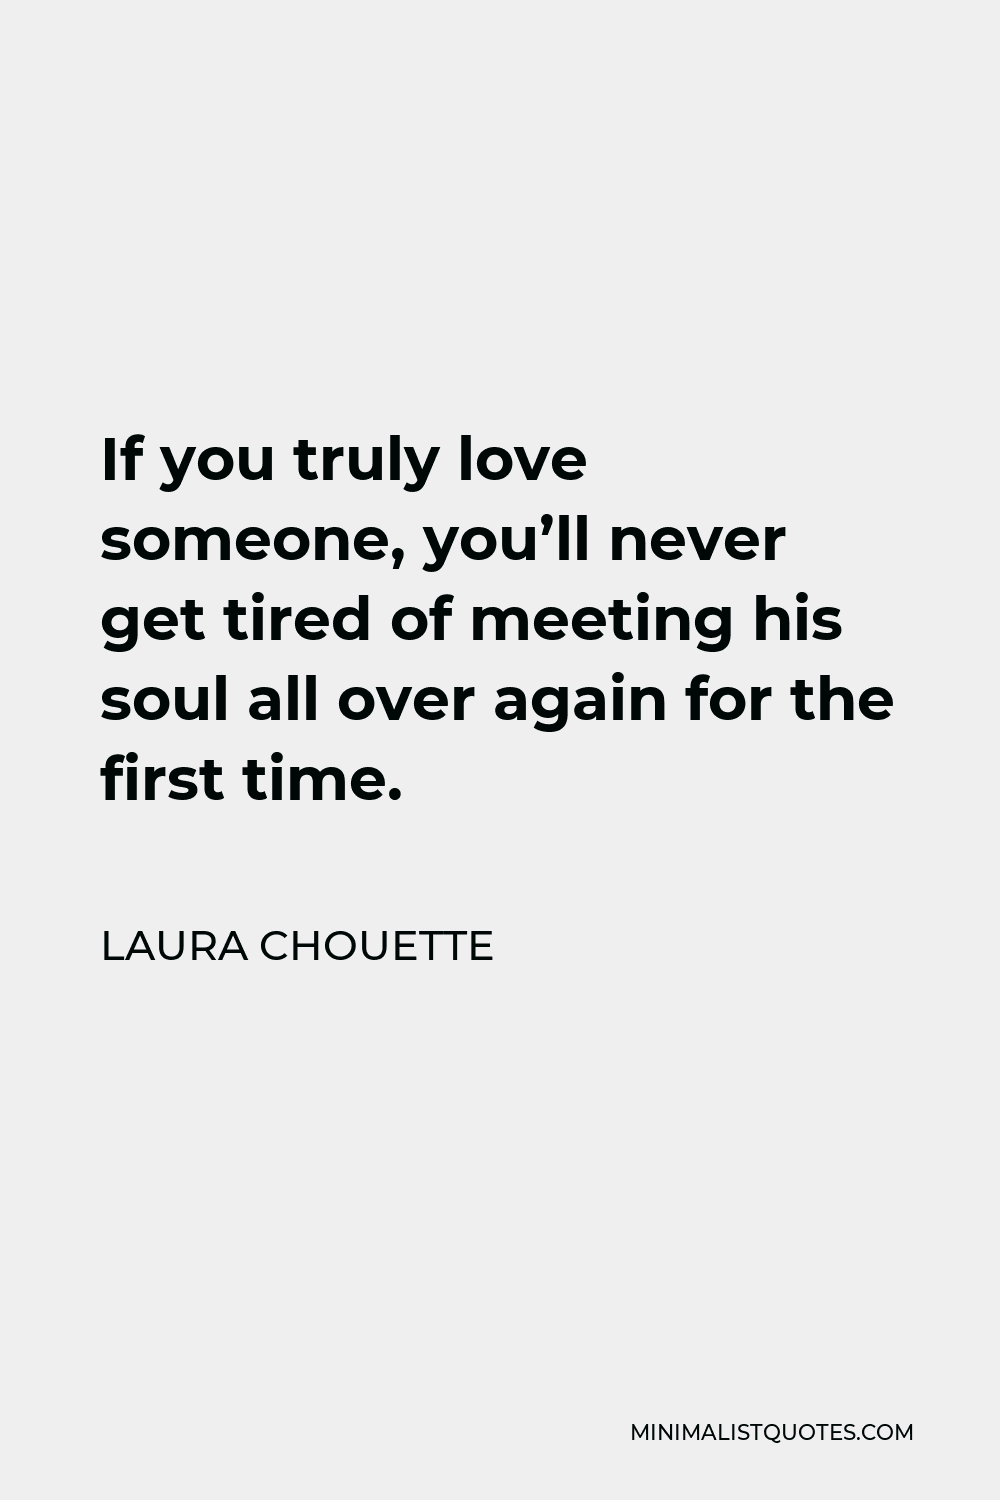 Laura Chouette Quote - If you truly love someone, you’ll never get tired of meeting his soul all over again for the first time.